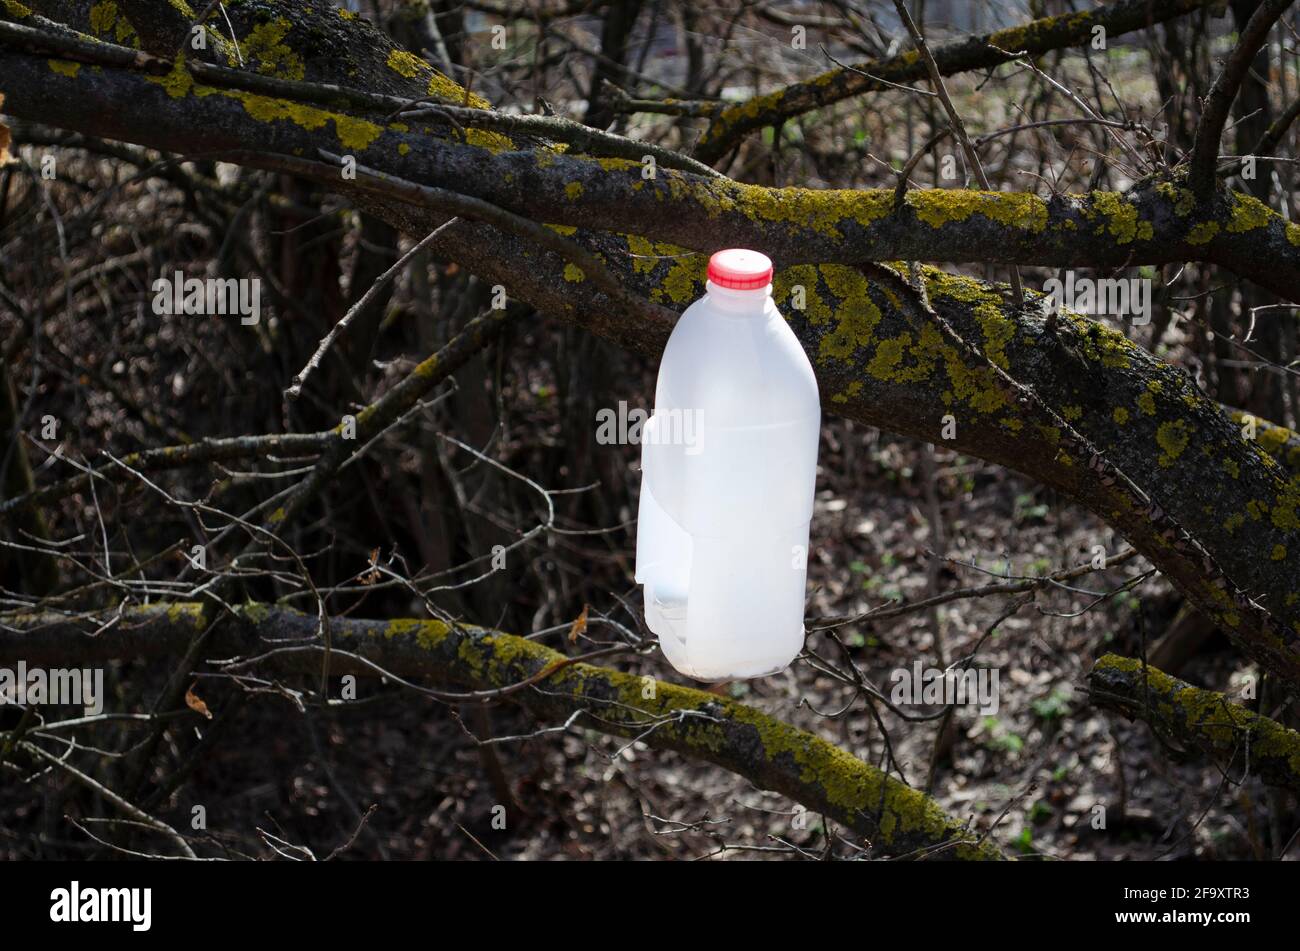 Feeder on the tree balk. Plastic bottle on tree in forest. Stock Photo